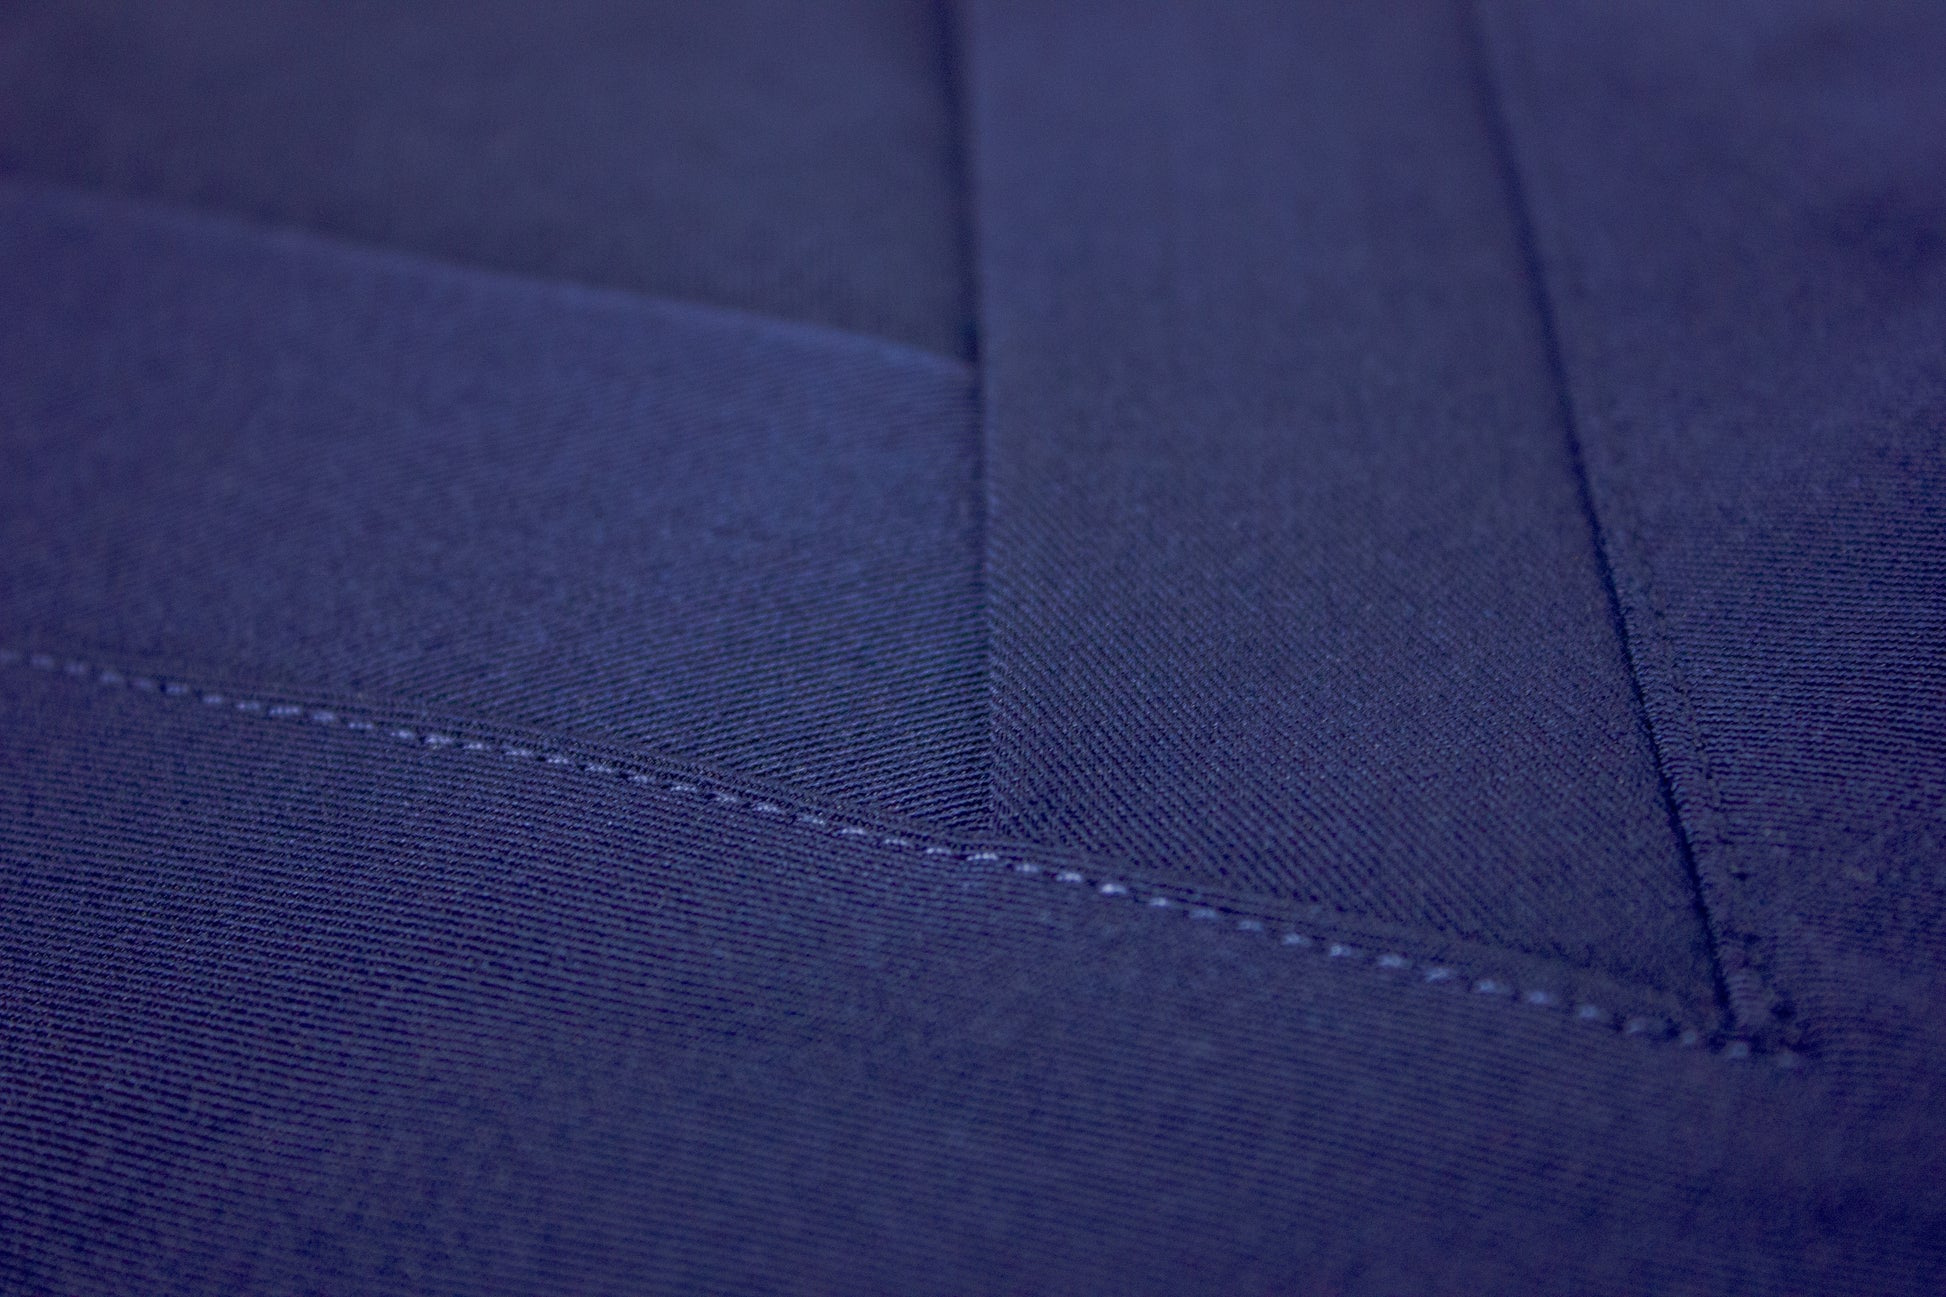 Close-up of stitch detailing on the V-neck of a royal blue scrub top.